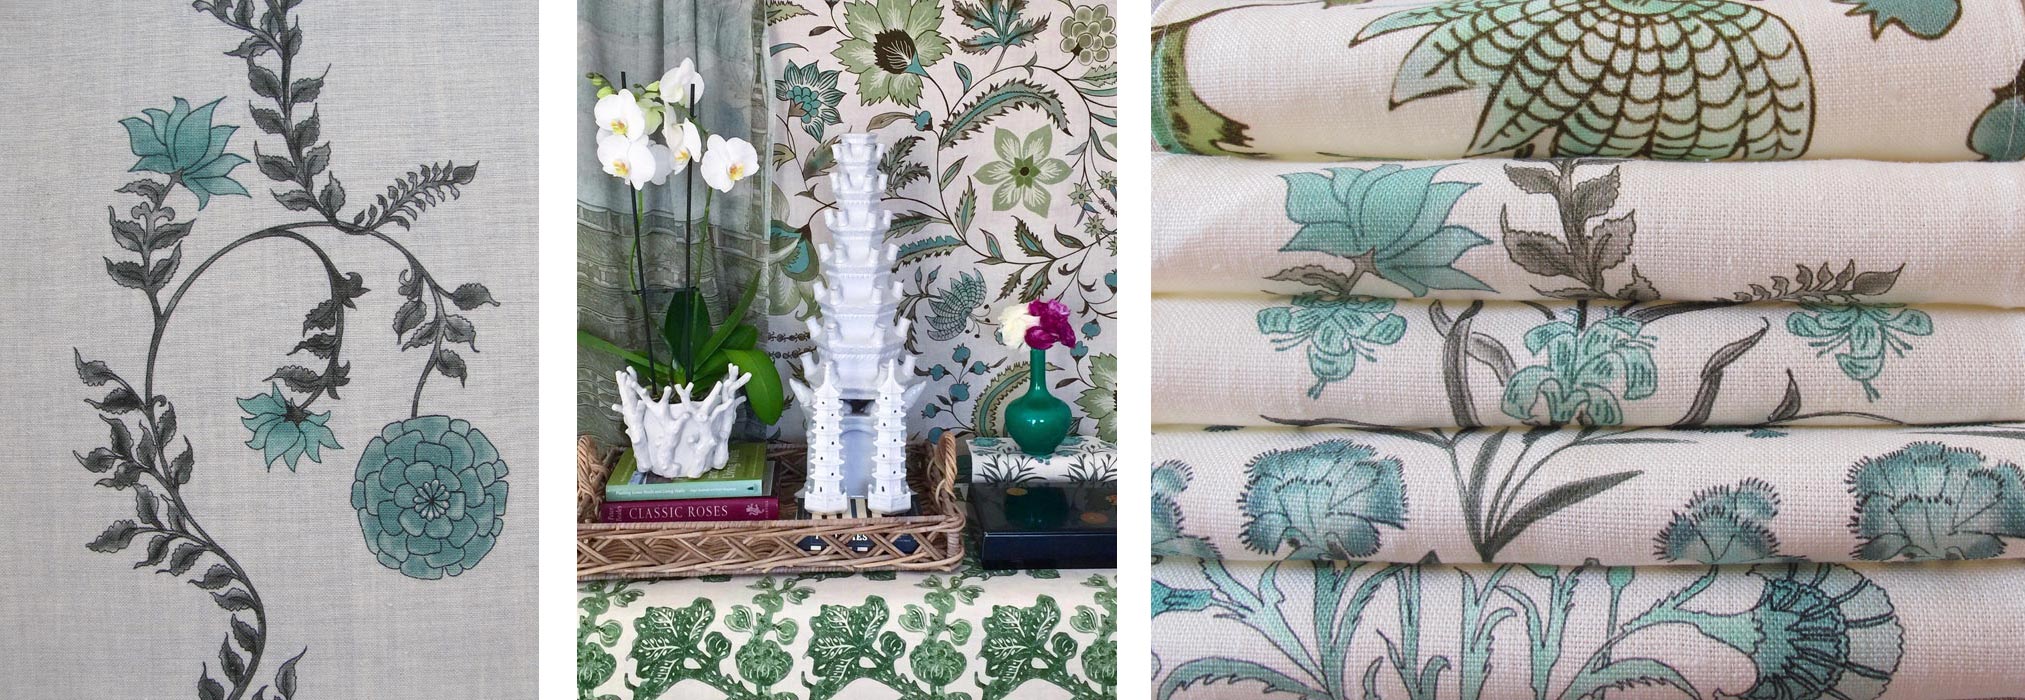 Botanica Trading fabrics are printed in England and Australia using a digital printing technology that is essentially waterless whilst offering a full range of colors.